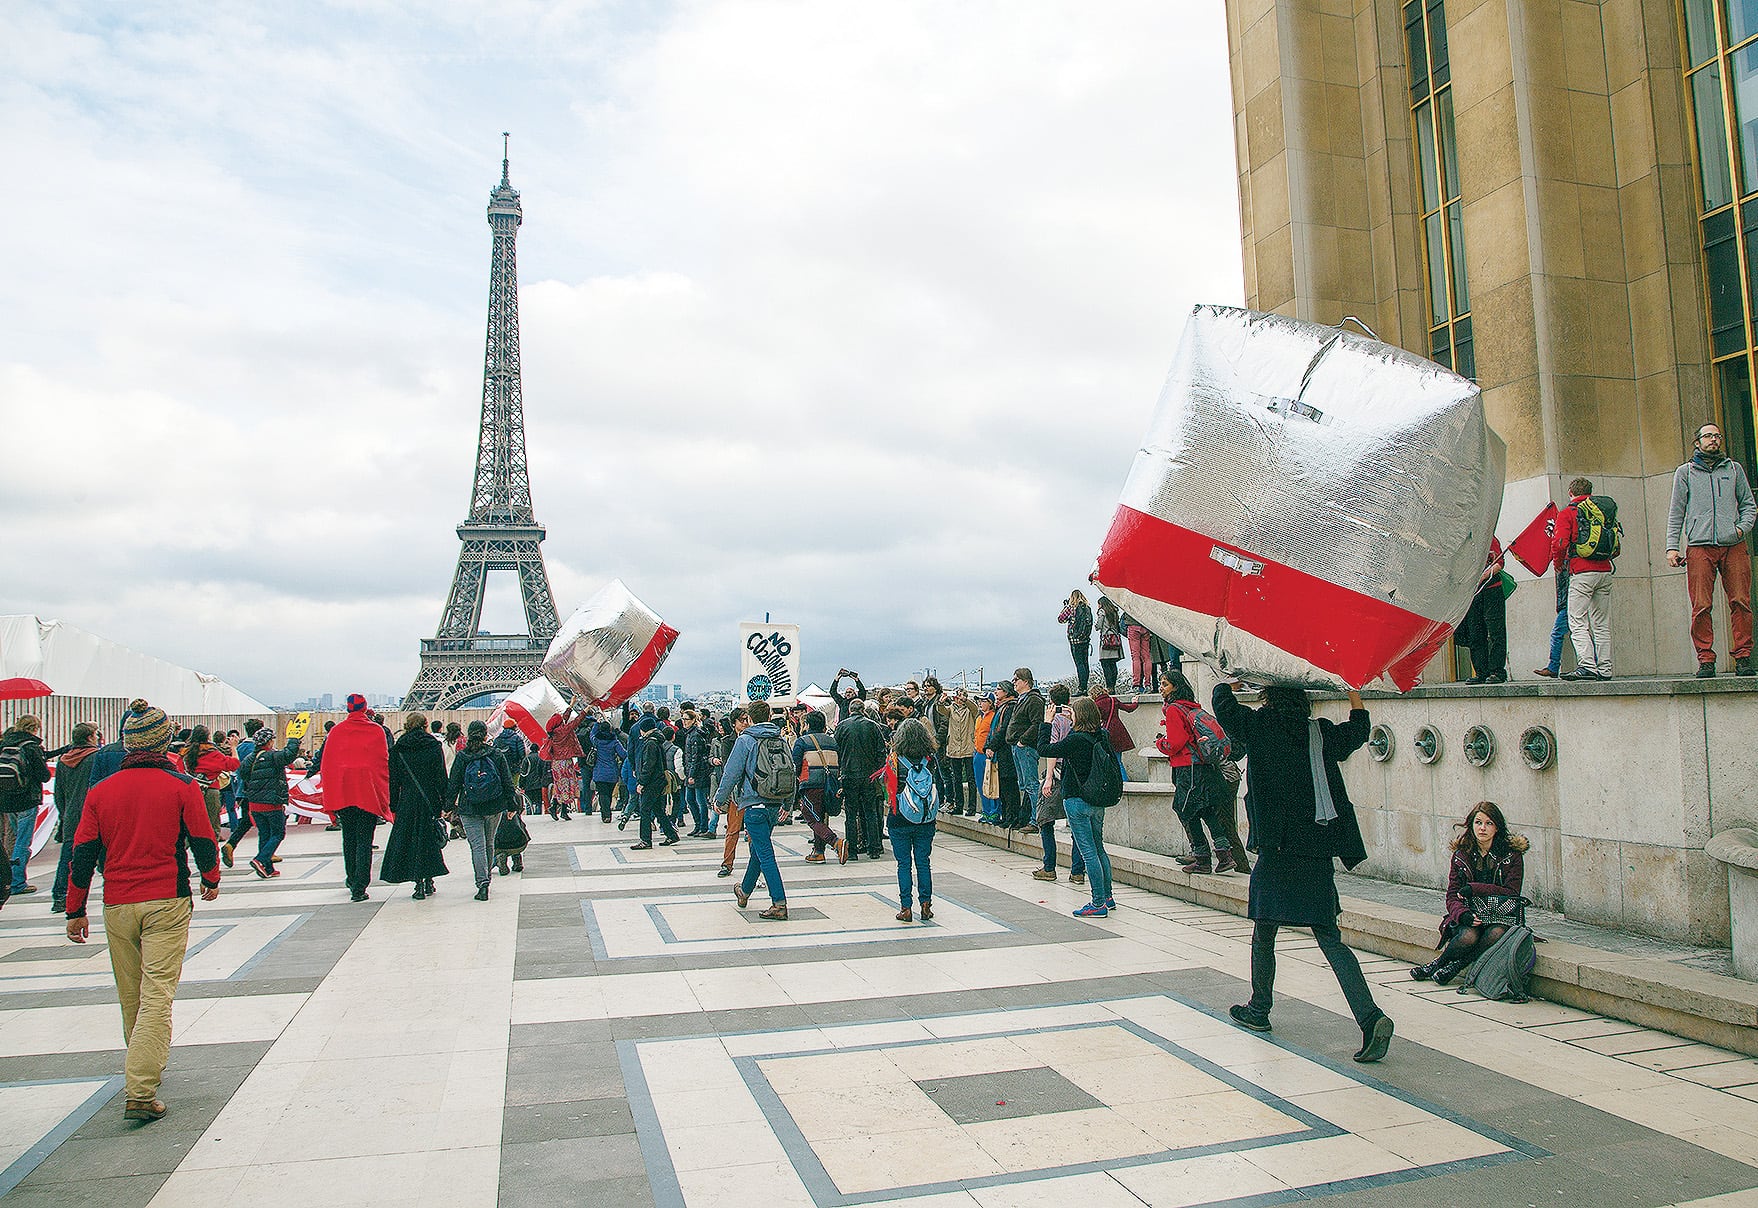 Inflatable barricades by Tools for Action 2015, Paris, 12 December 2015, Photo credit: Mona Caron